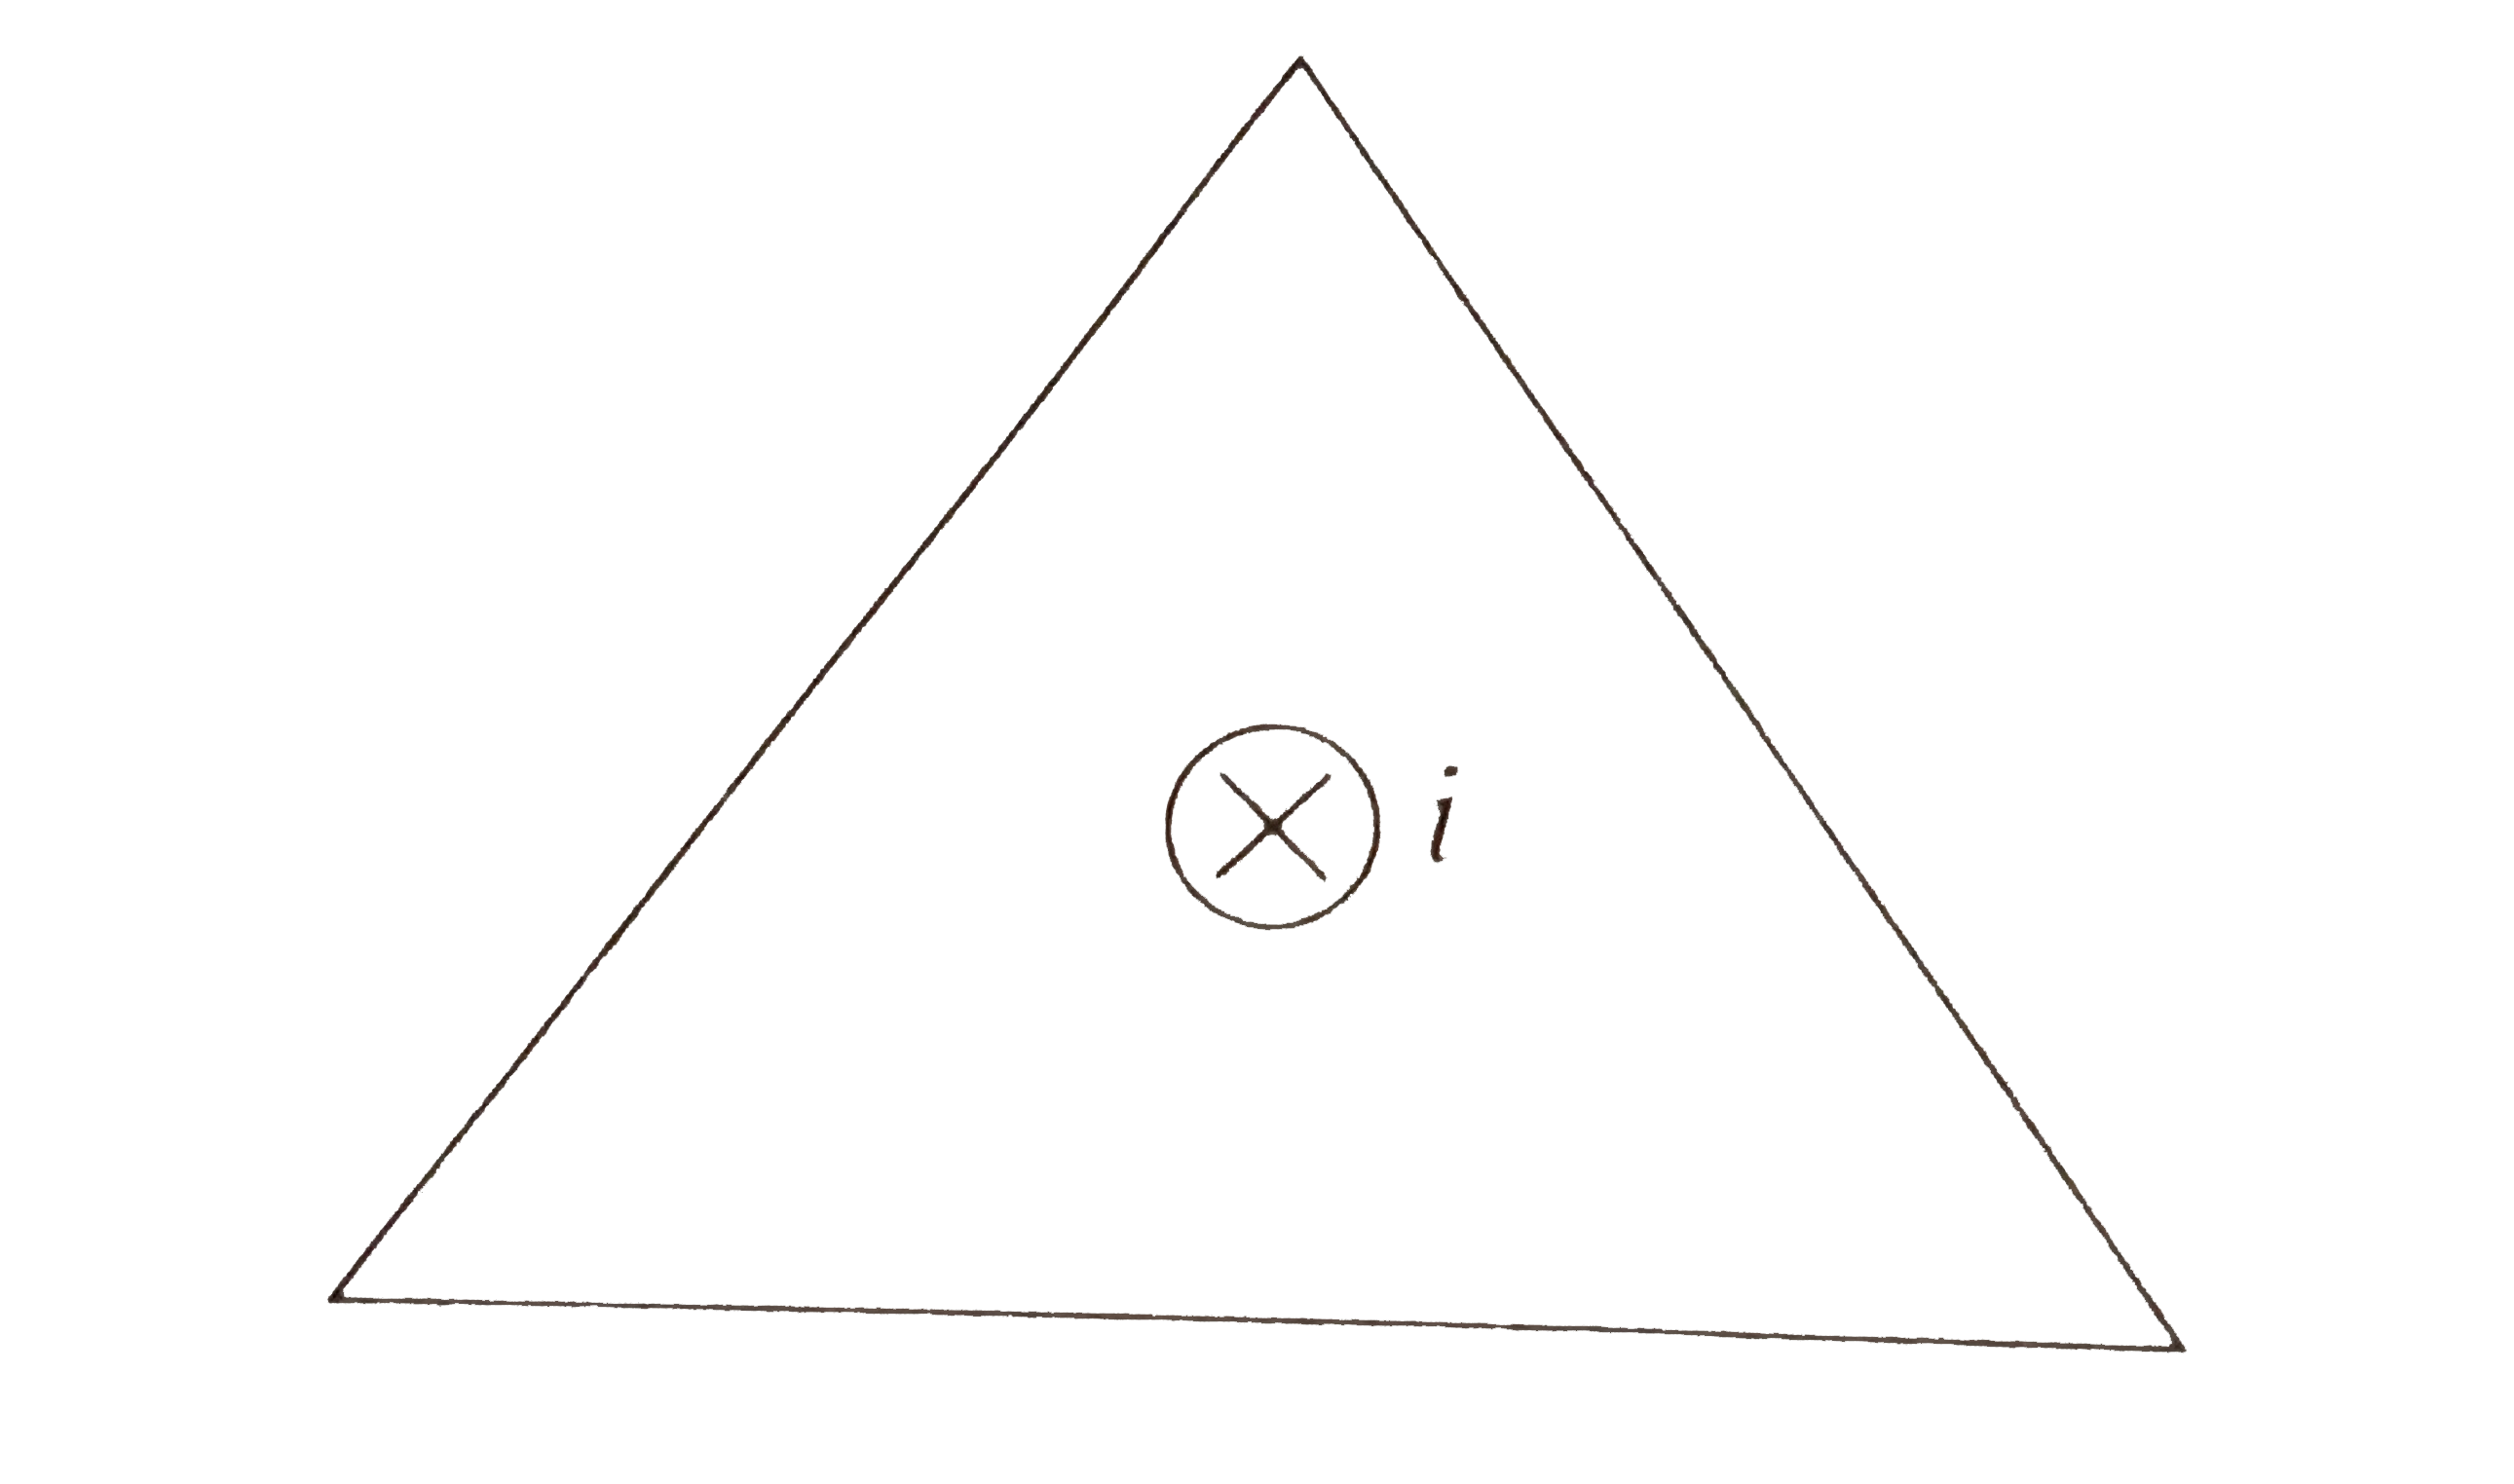 A current carrying straight wire passes inside a triangular coil as shown in figure. The current in the wire is perpendicular to paper inwards. Find the direction of the induced current in the loop, if current in the wire is increased.